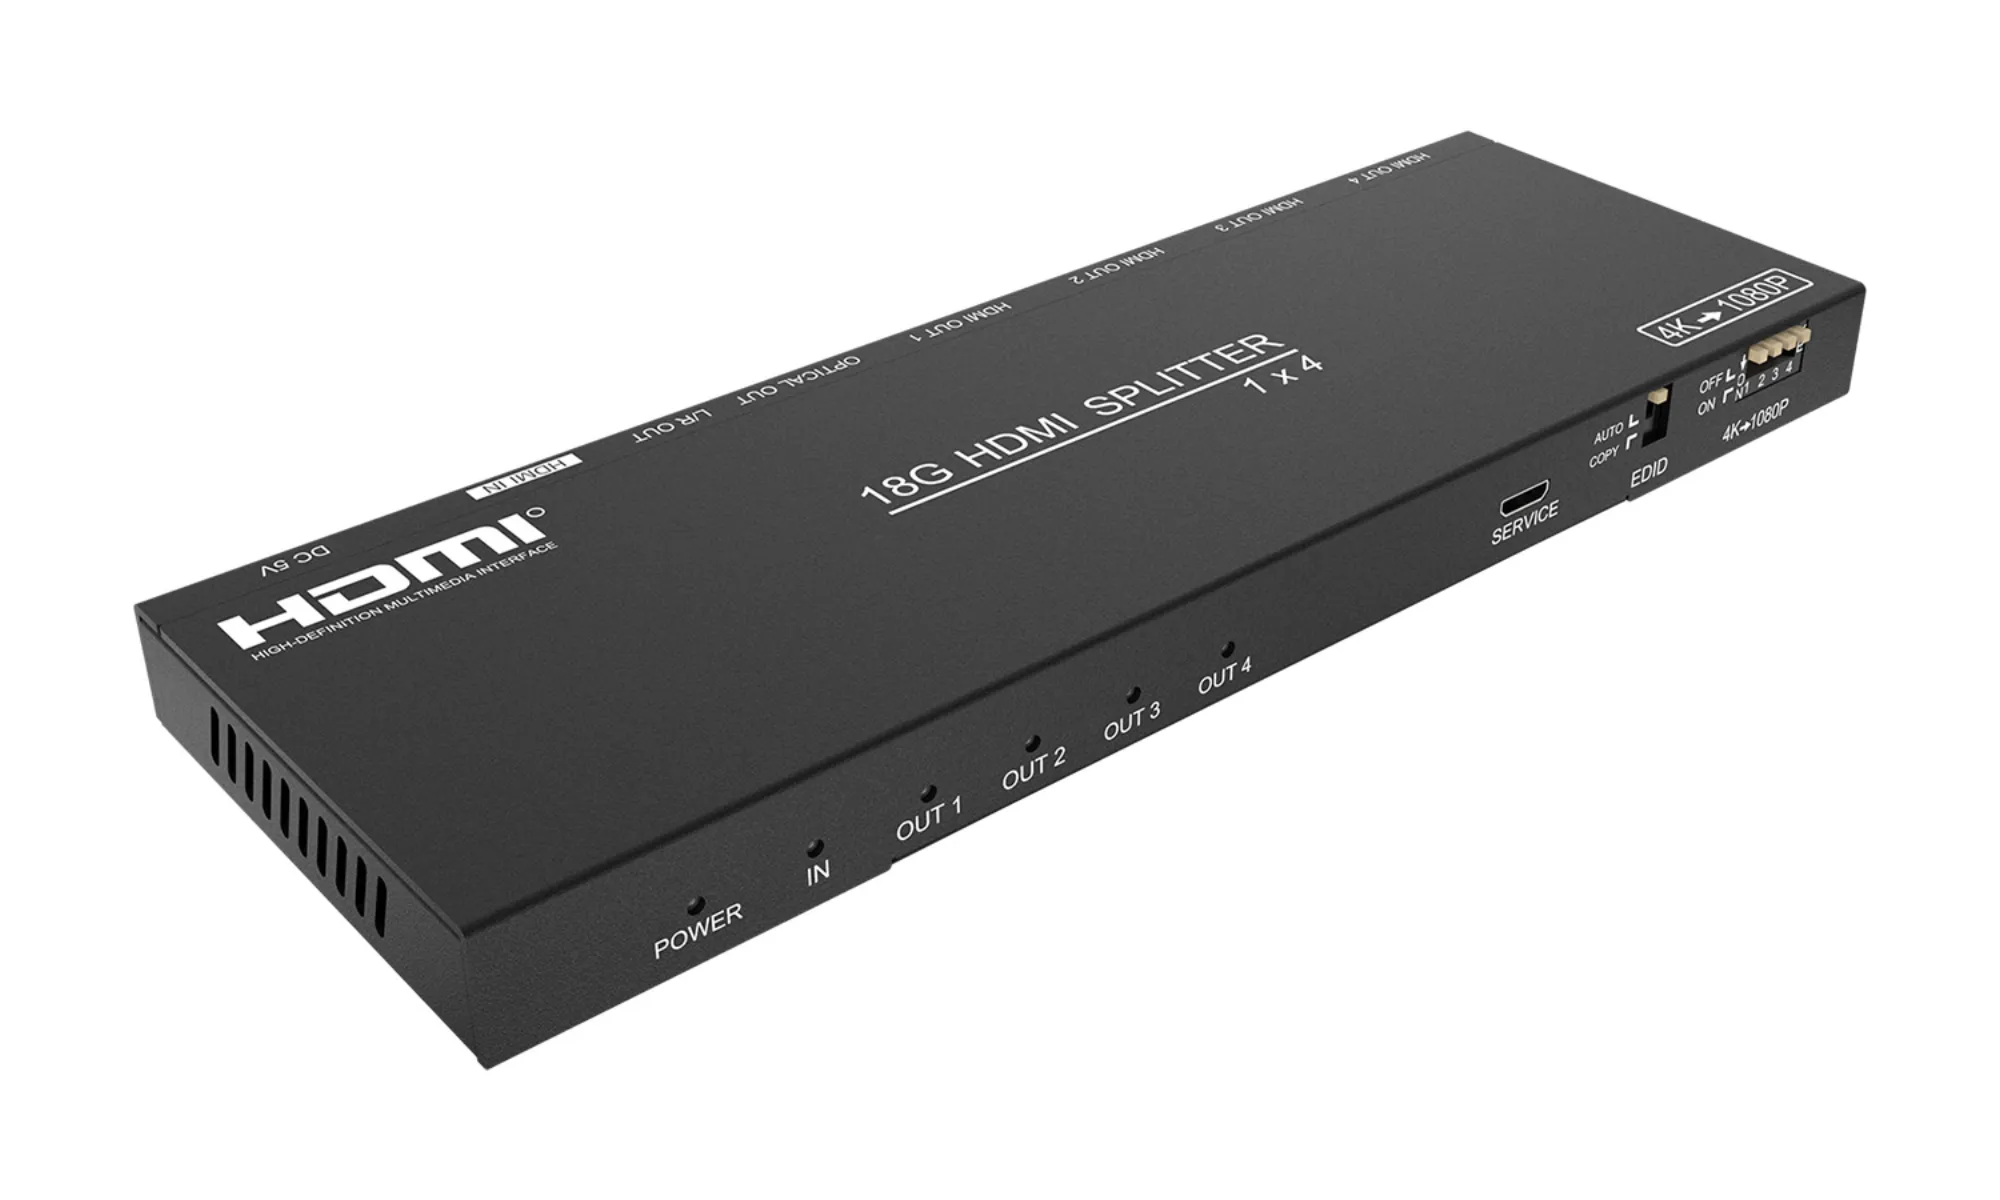 1x4 4K HDMI Splitter with Downscaler and Audio Extraction